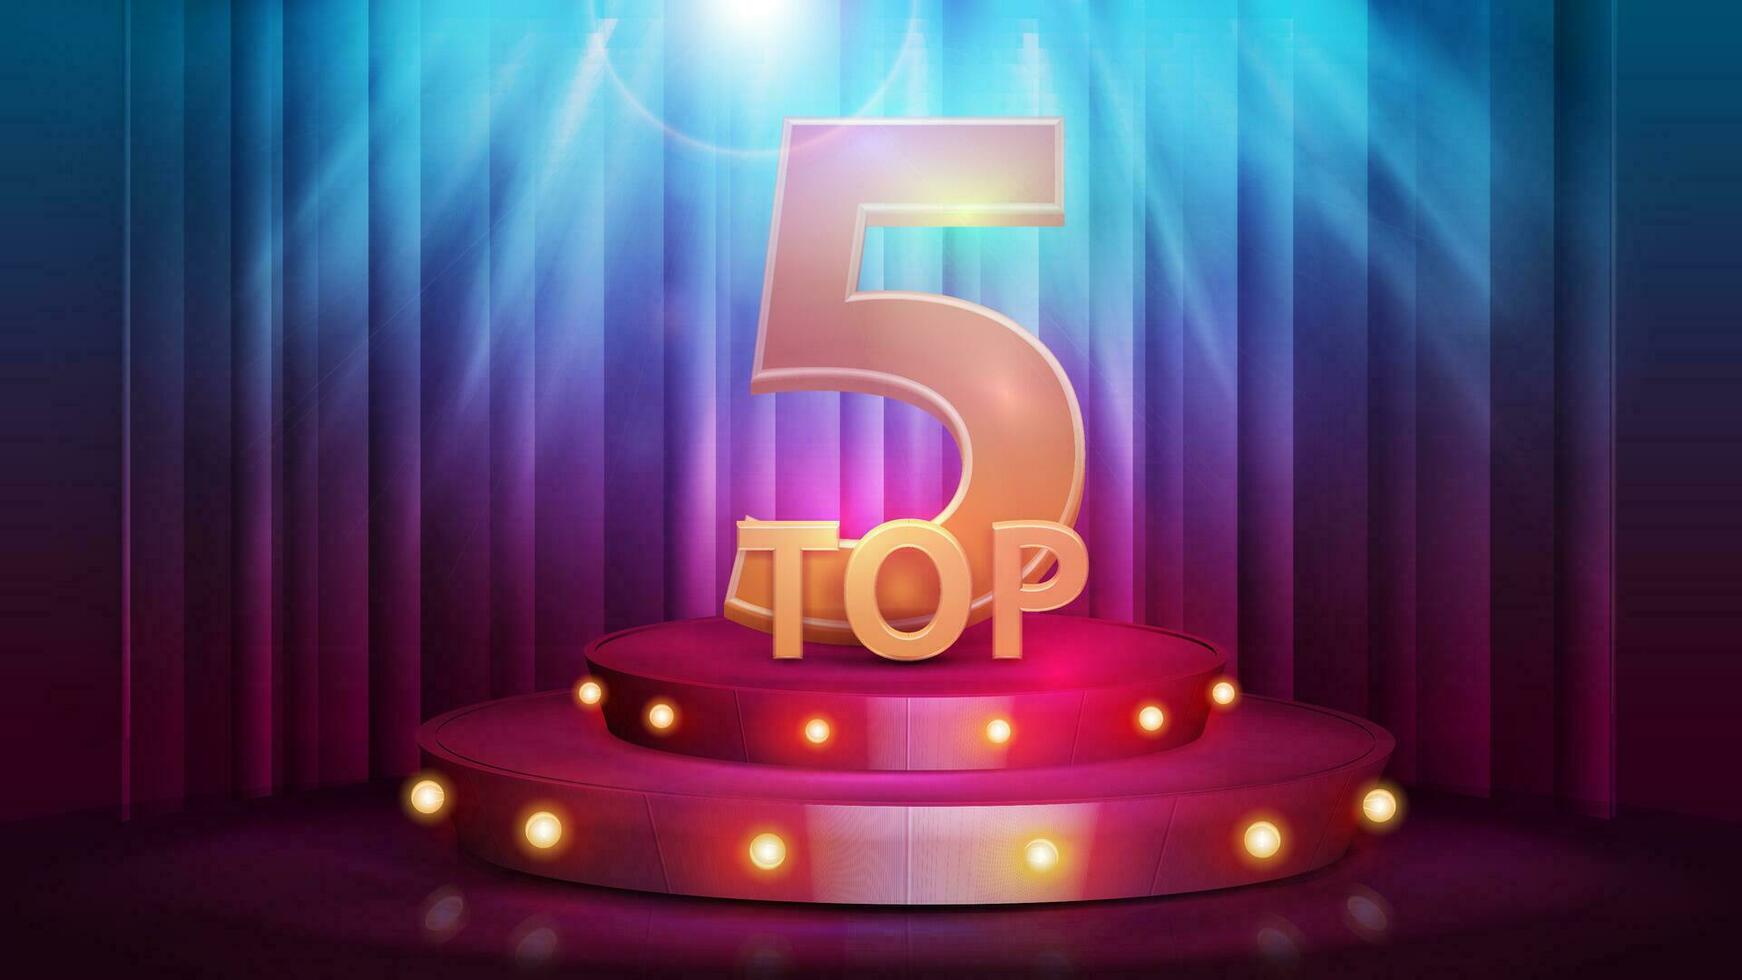 Top 5, banner with red podium with award, bulb lights and spotlight on background with curtain vector